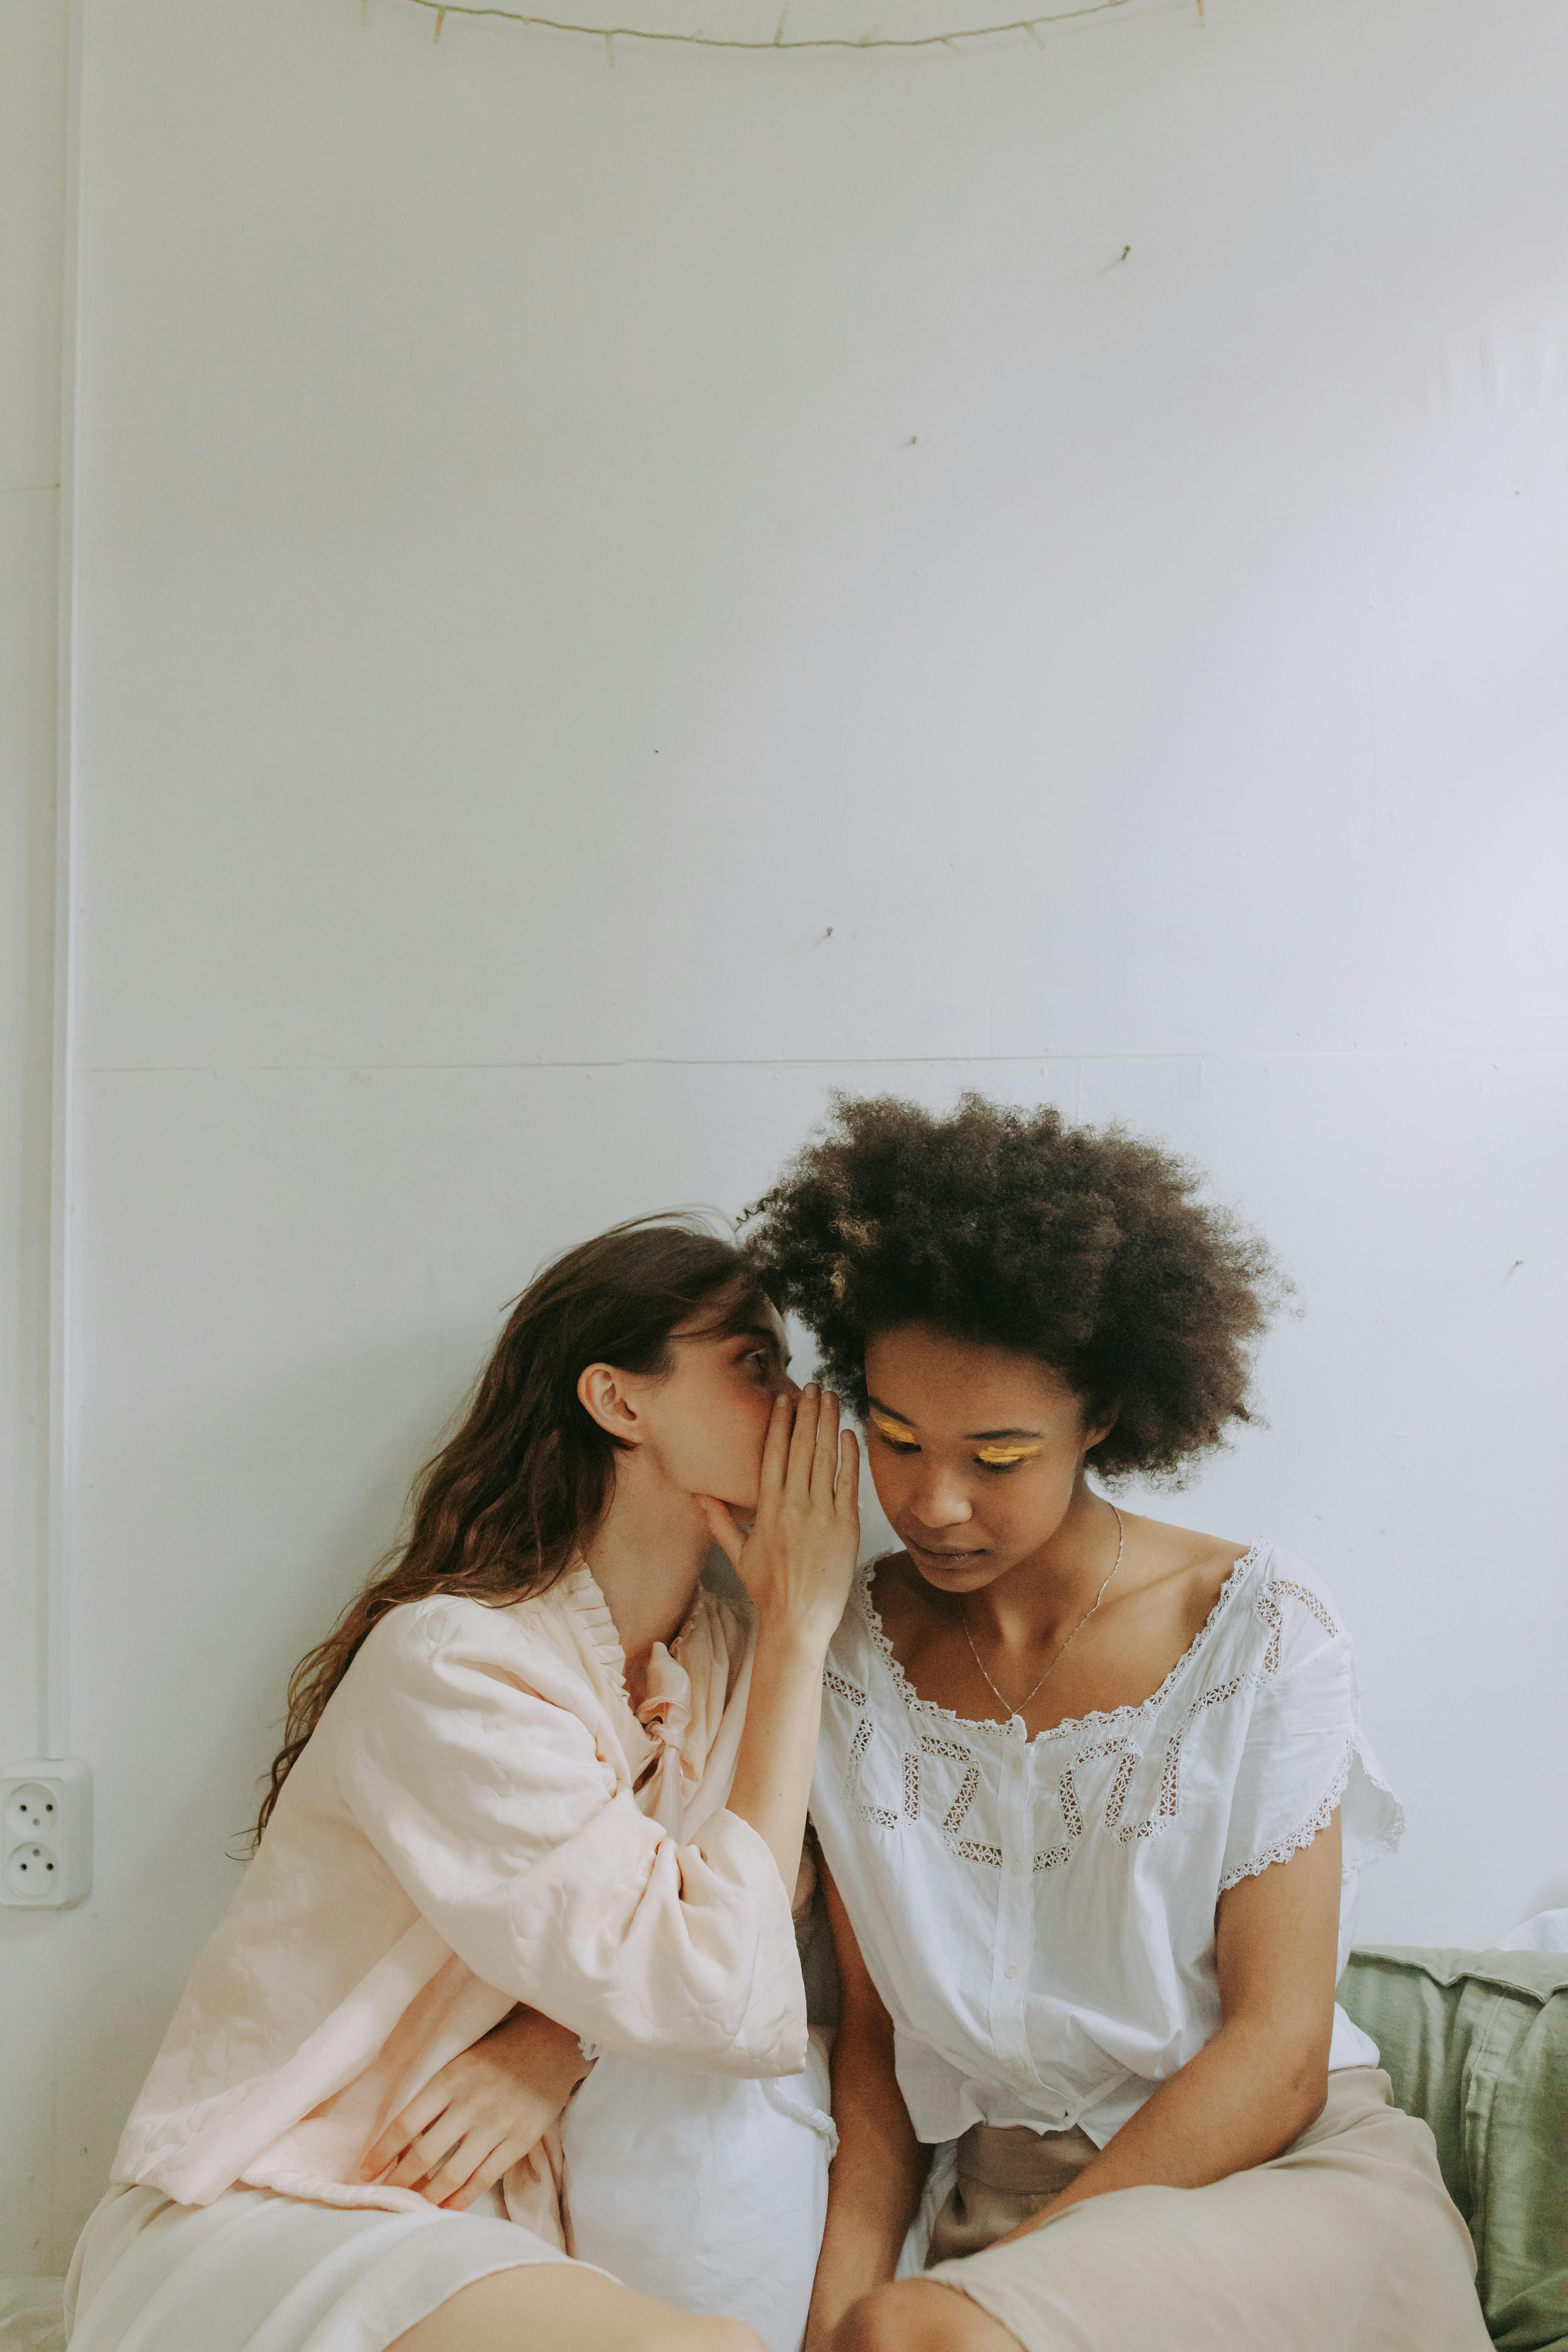 A woman telling another woman a secret | Source: Pexels